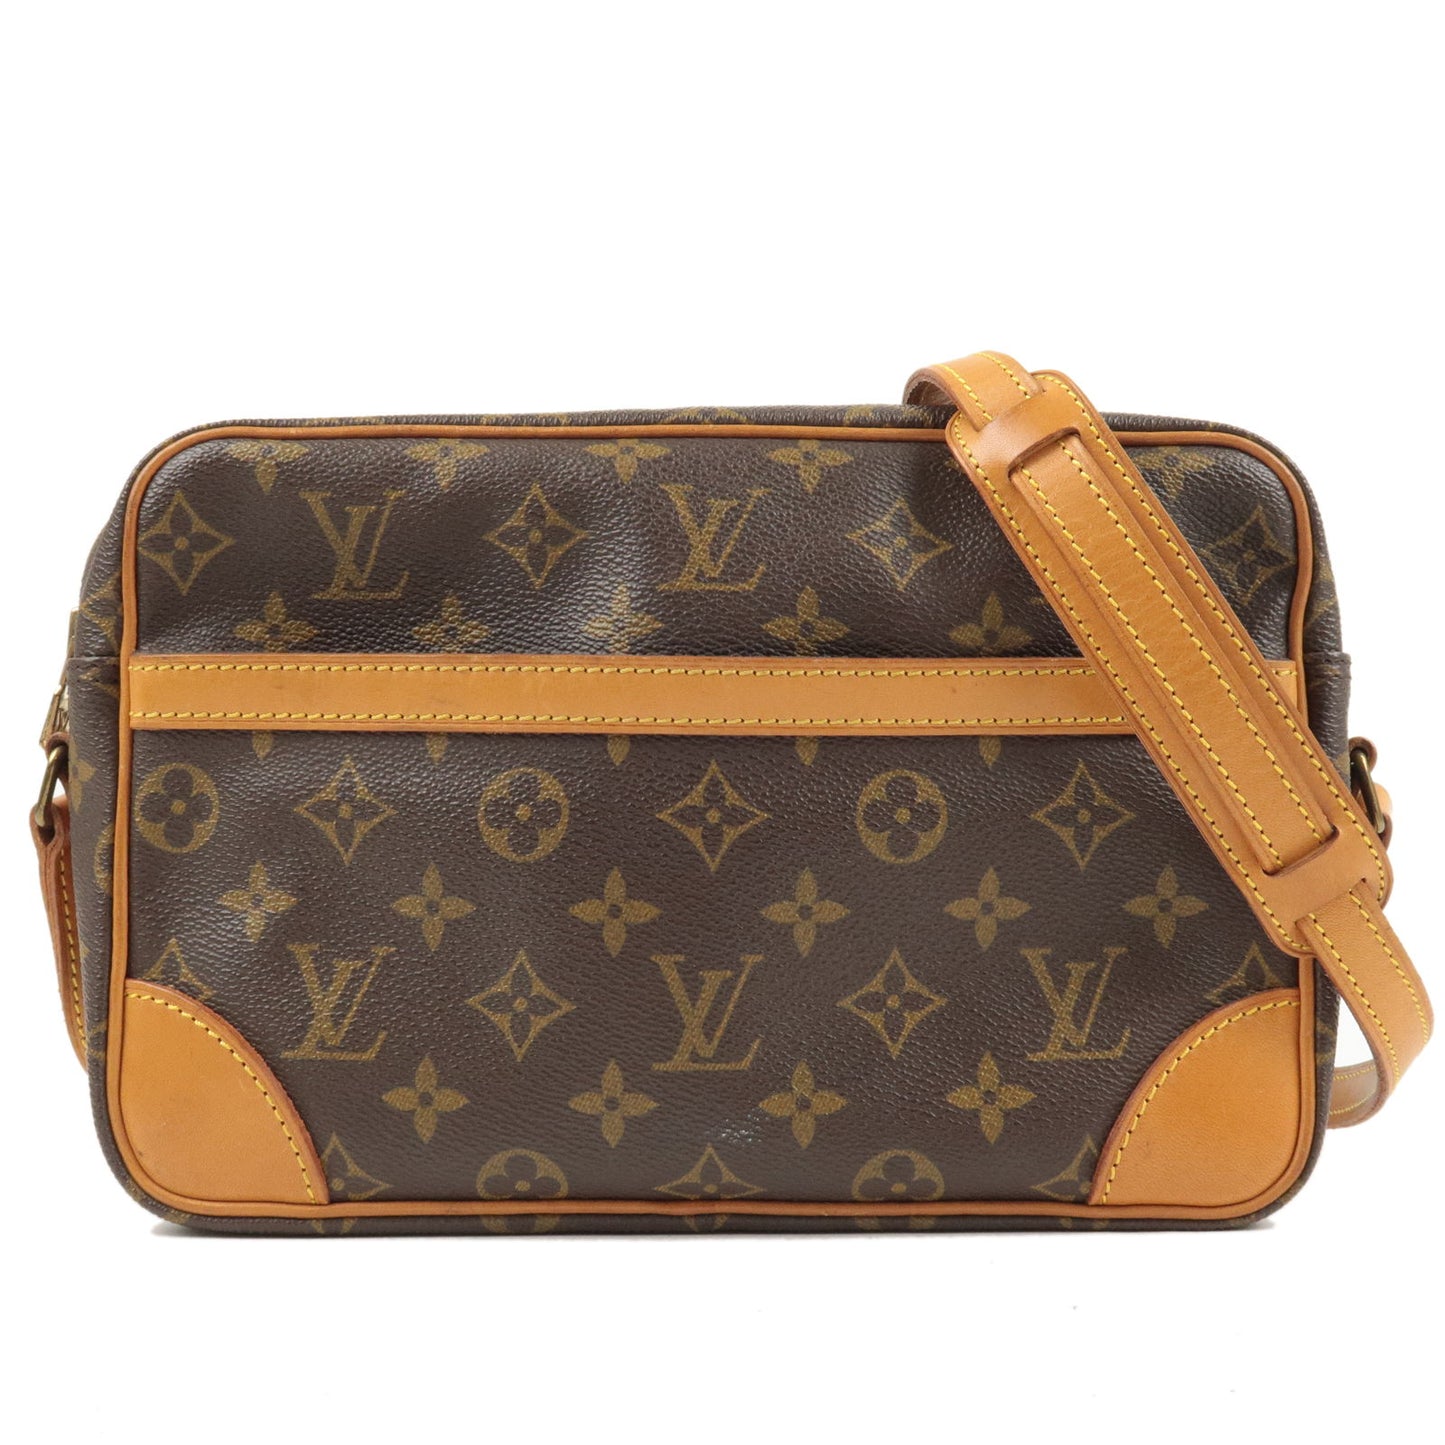 Sold at Auction: LOUIS VUITTON MONOGRAM SHADOW DISCOVERY POCHETTE